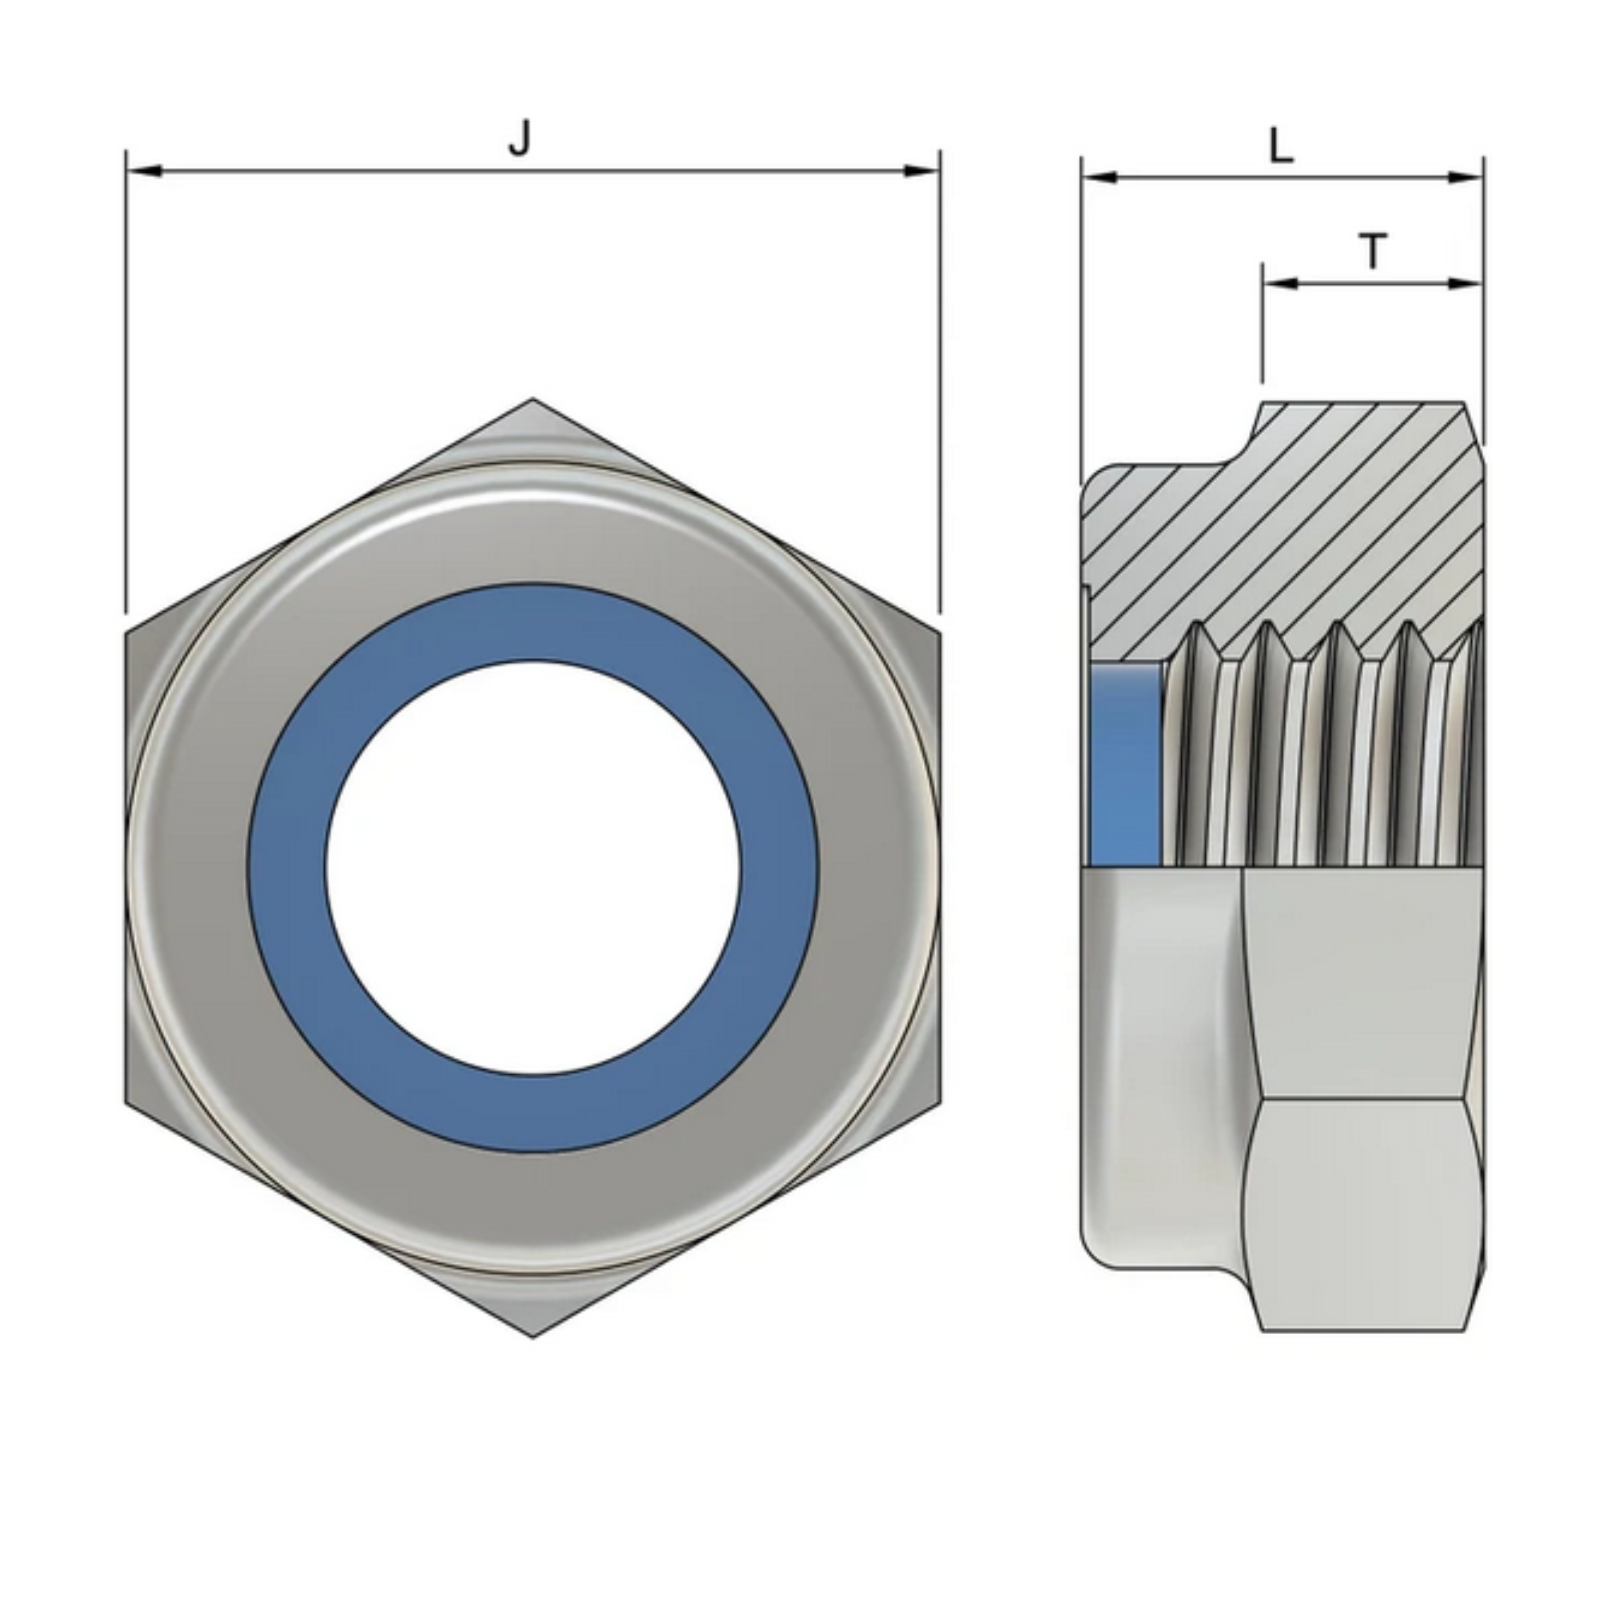 M3 Hexagon Nylon Locking Nuts (DIN 985) - Stainless Steel (A4)